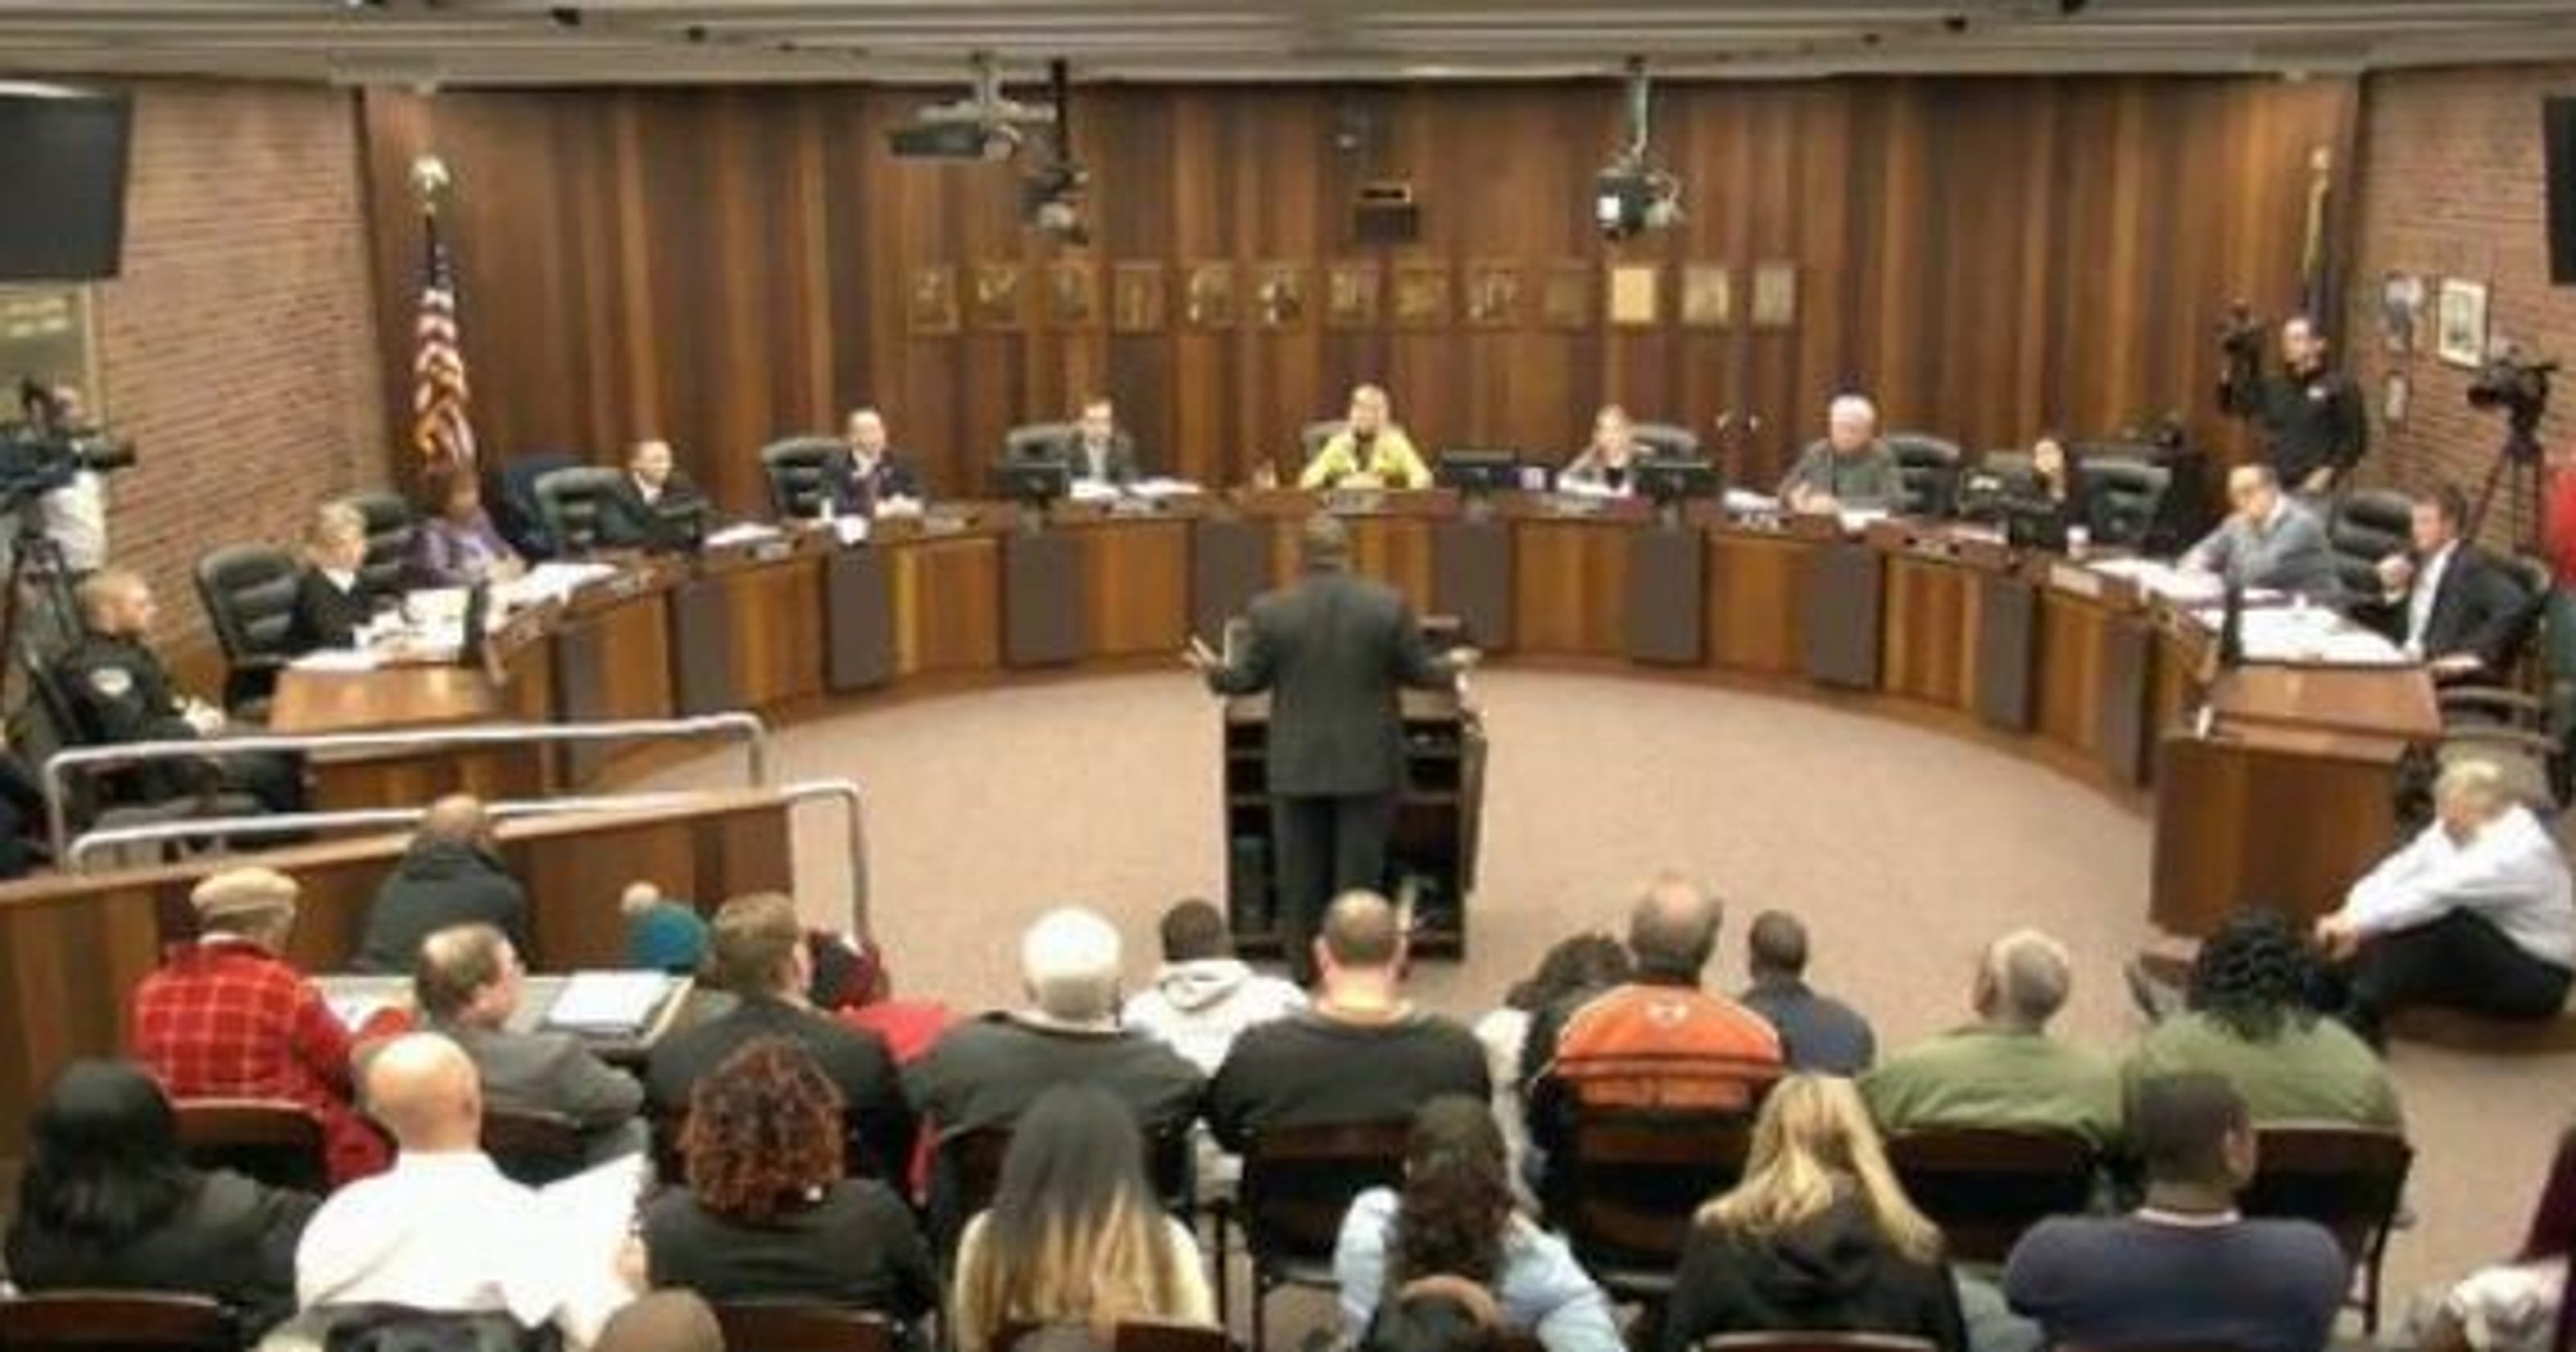 city-council-approves-changes-to-meeting-style-public-comment